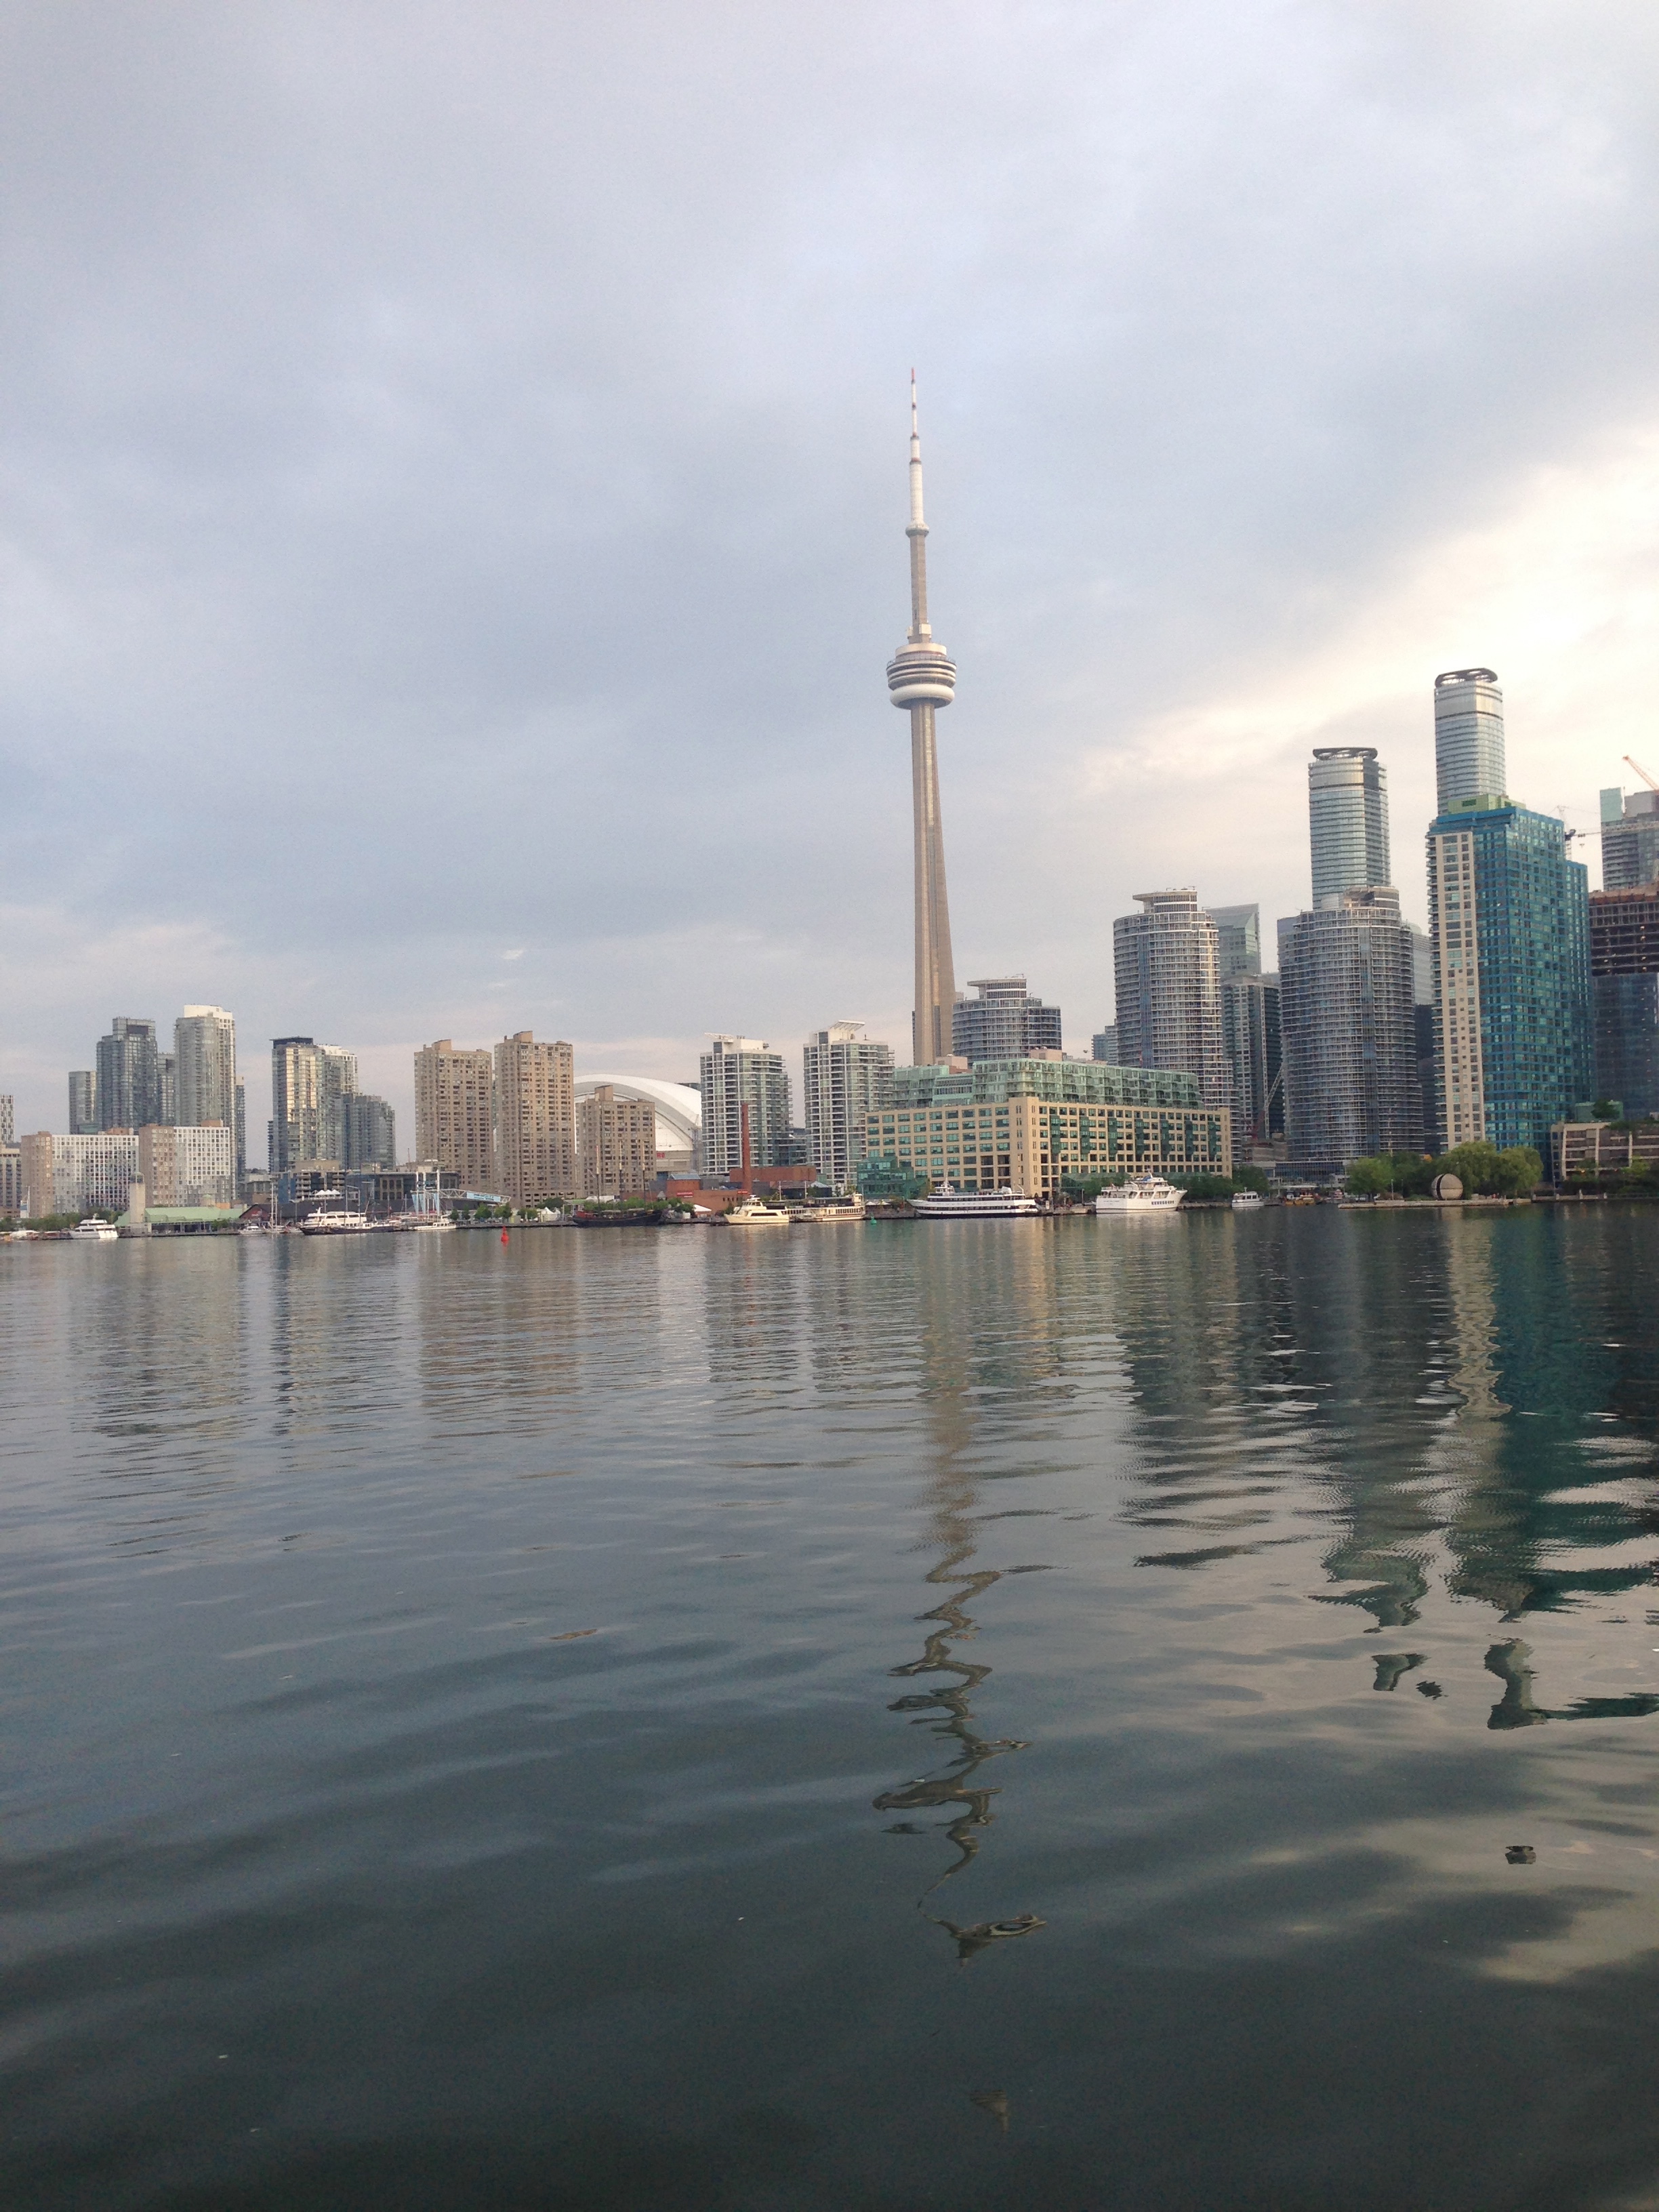 On the ferry heading to Toronto Centre Island.